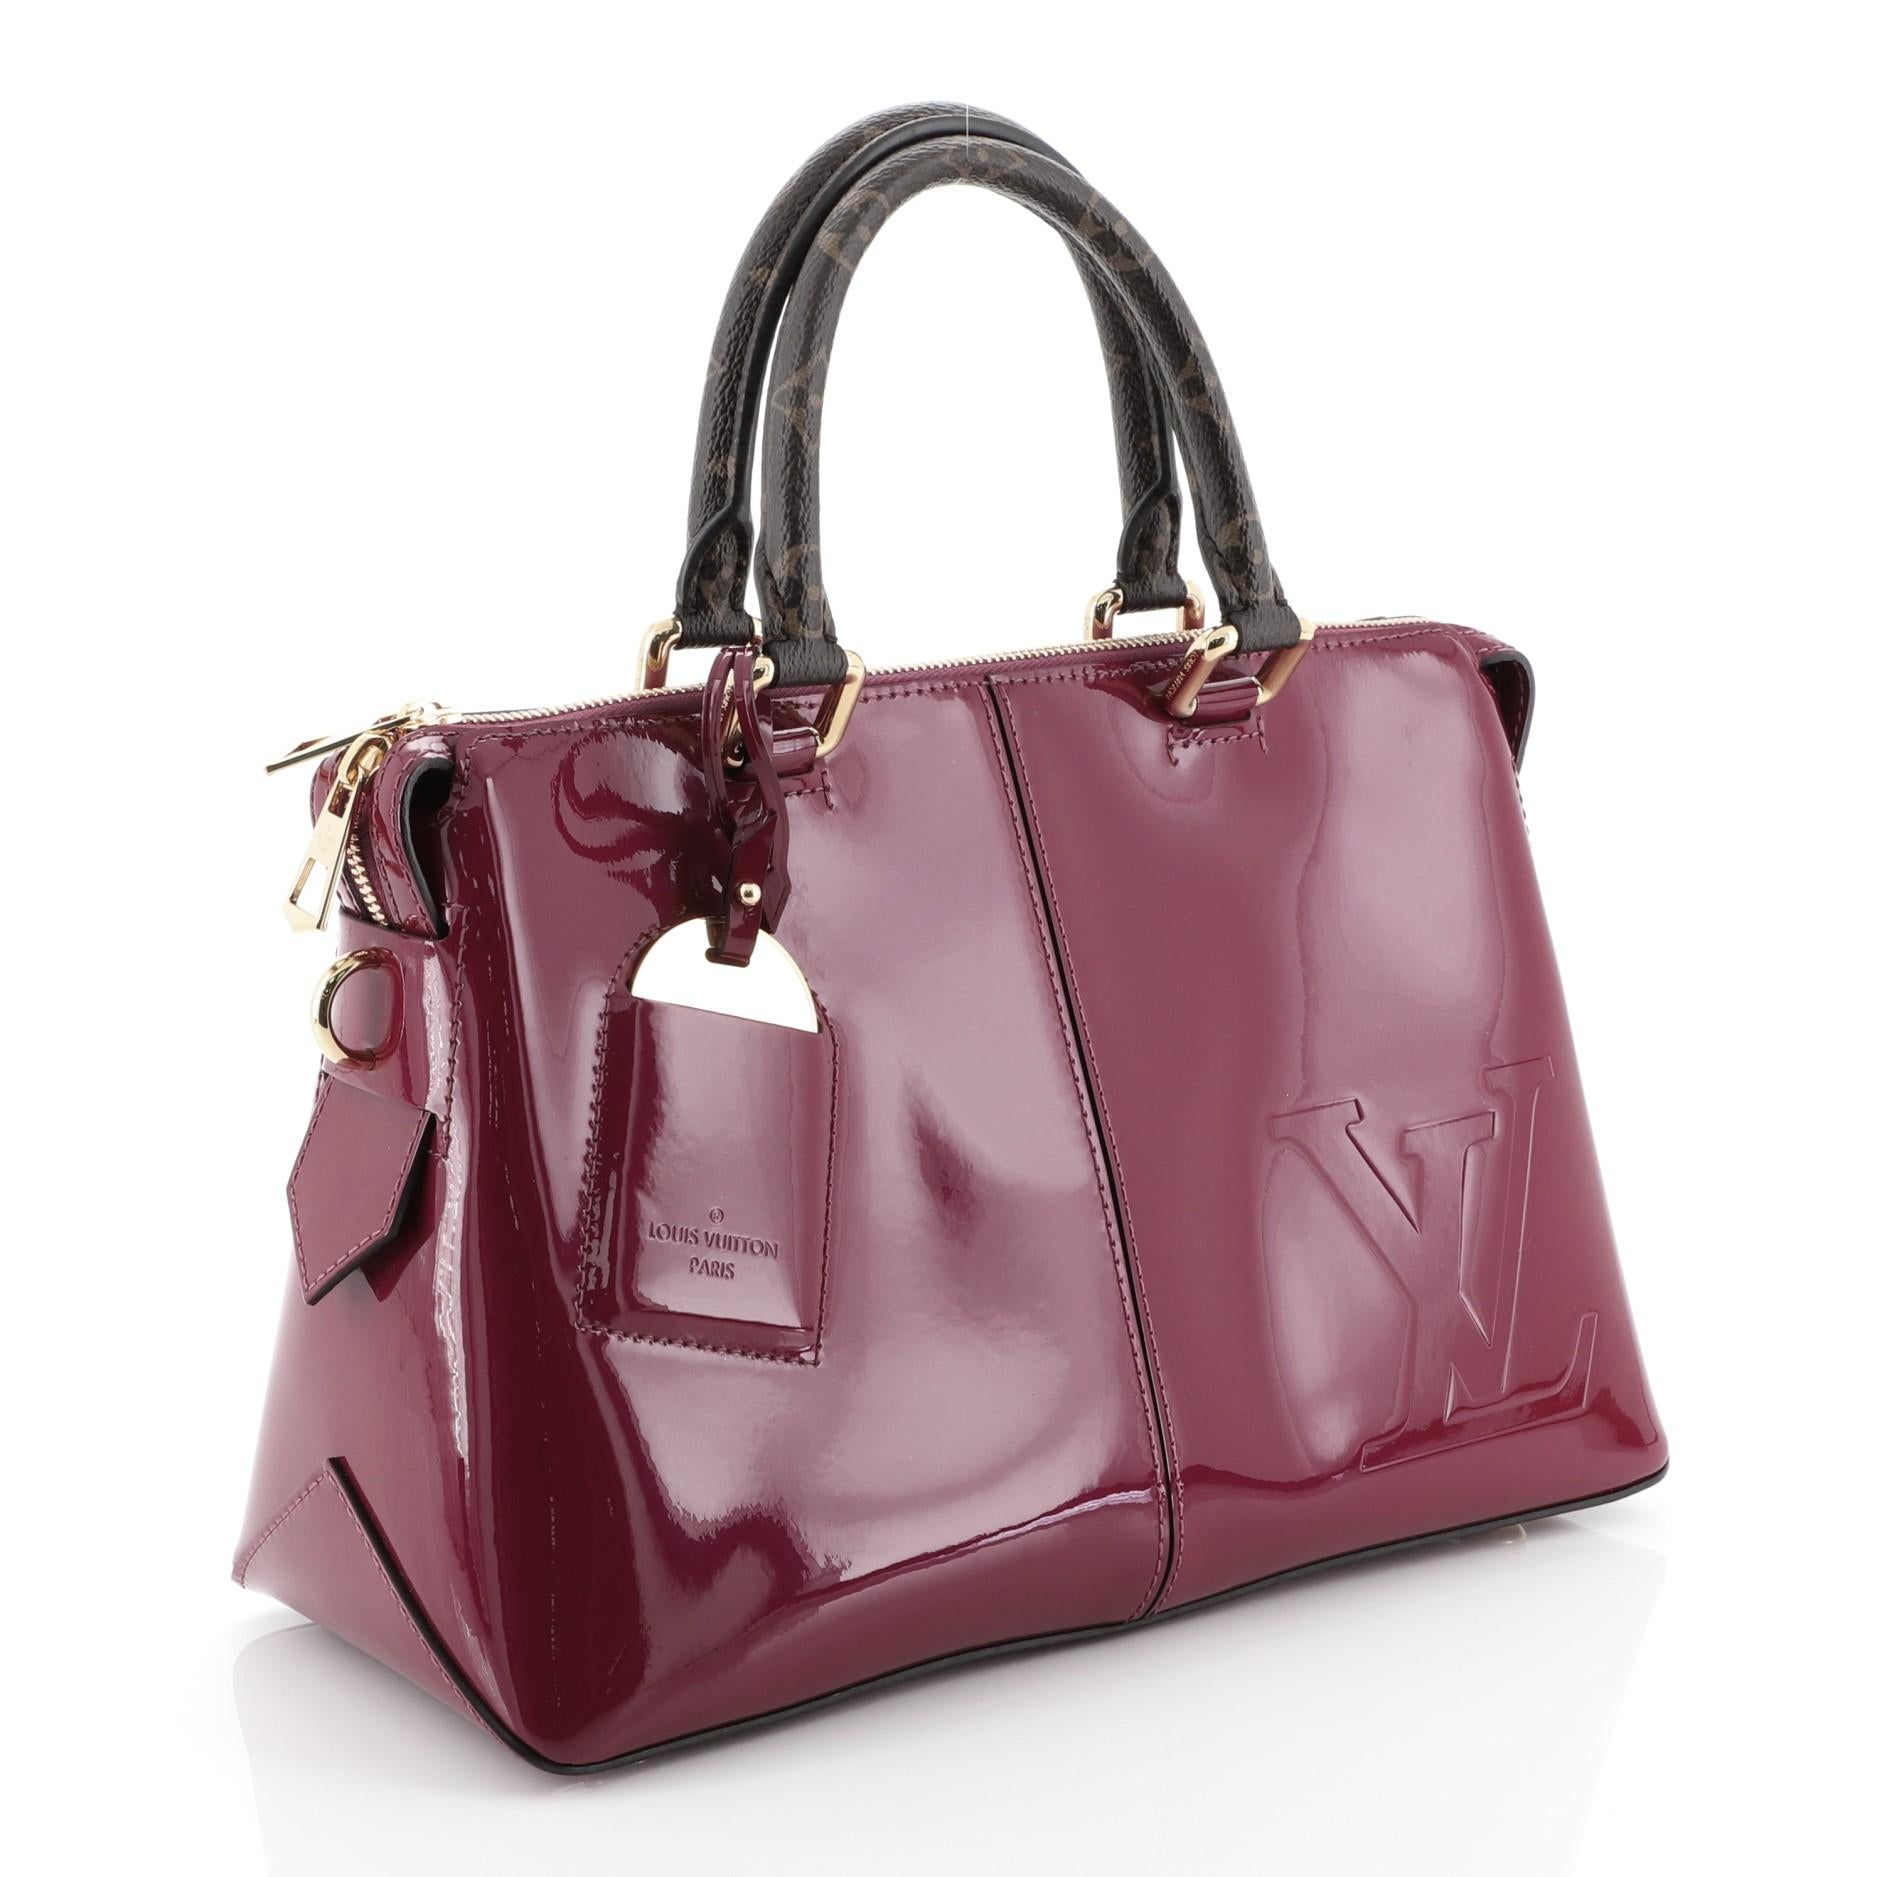 This Louis Vuitton Miroir Handbag Vernis with Monogram Canvas, crafted in purple monogram vernis, features dual rolled monogram handles and gold-tone hardware. Its zip closure opens to a purple fabric and coated canvas interior with slip pockets.